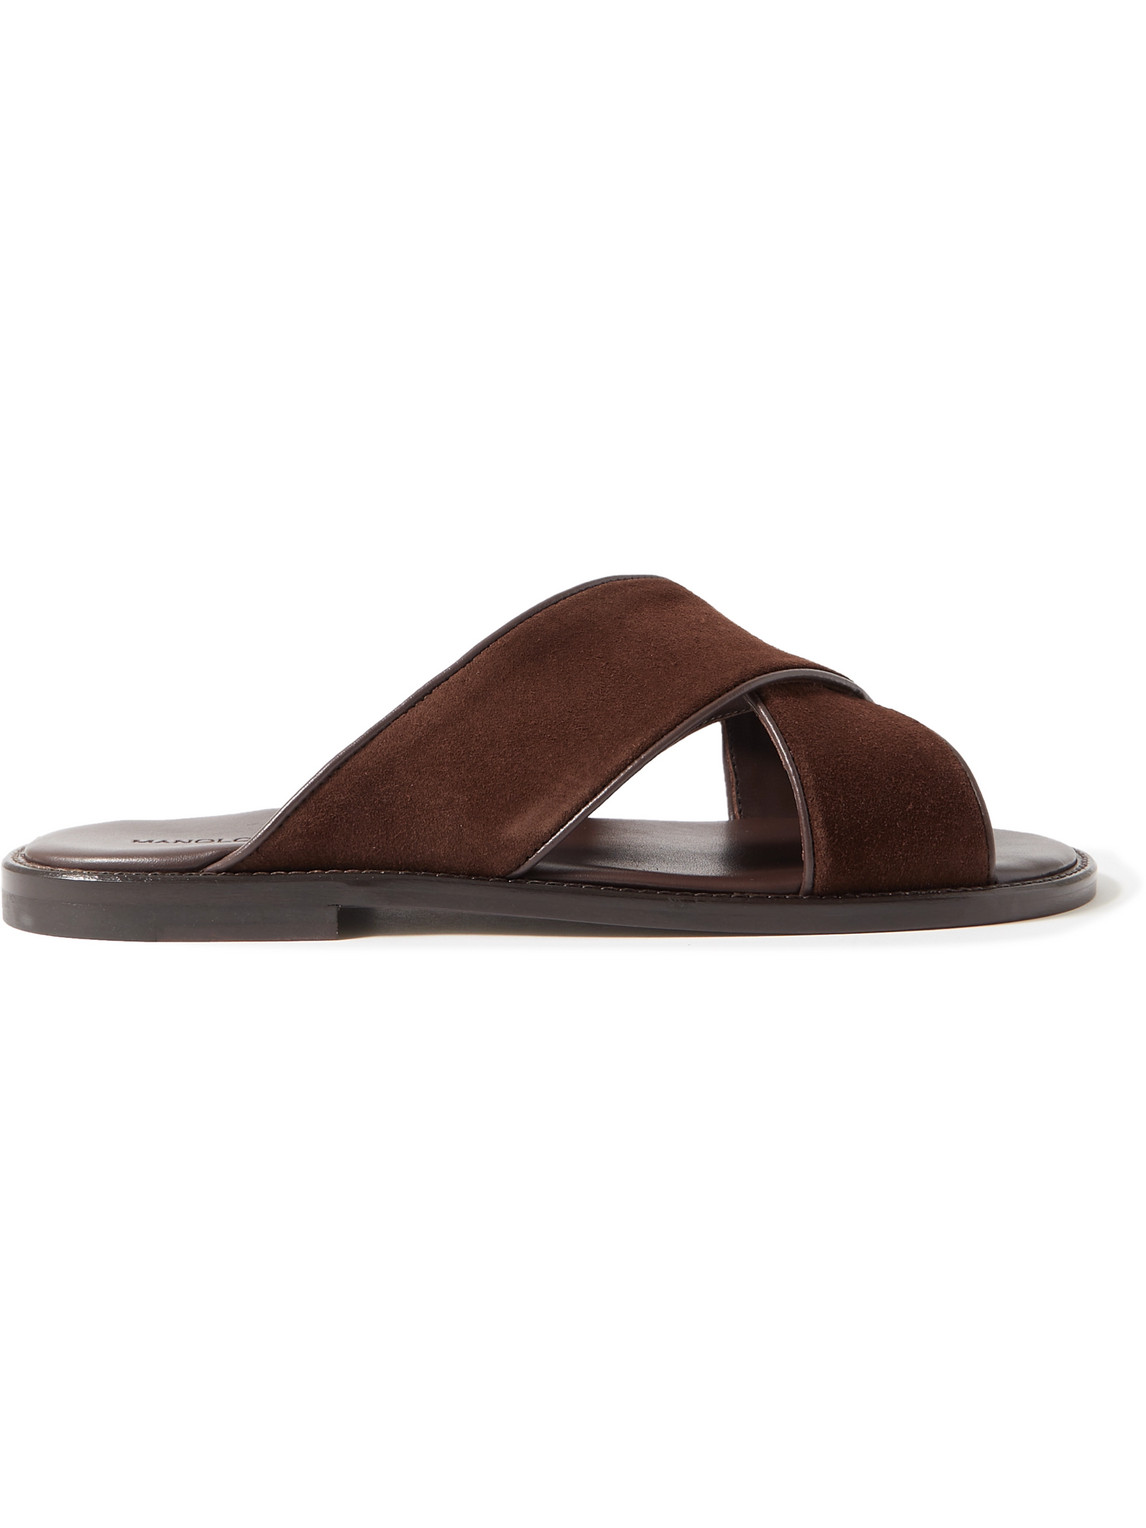 Otawi Leather-Trimmed Suede Sandals